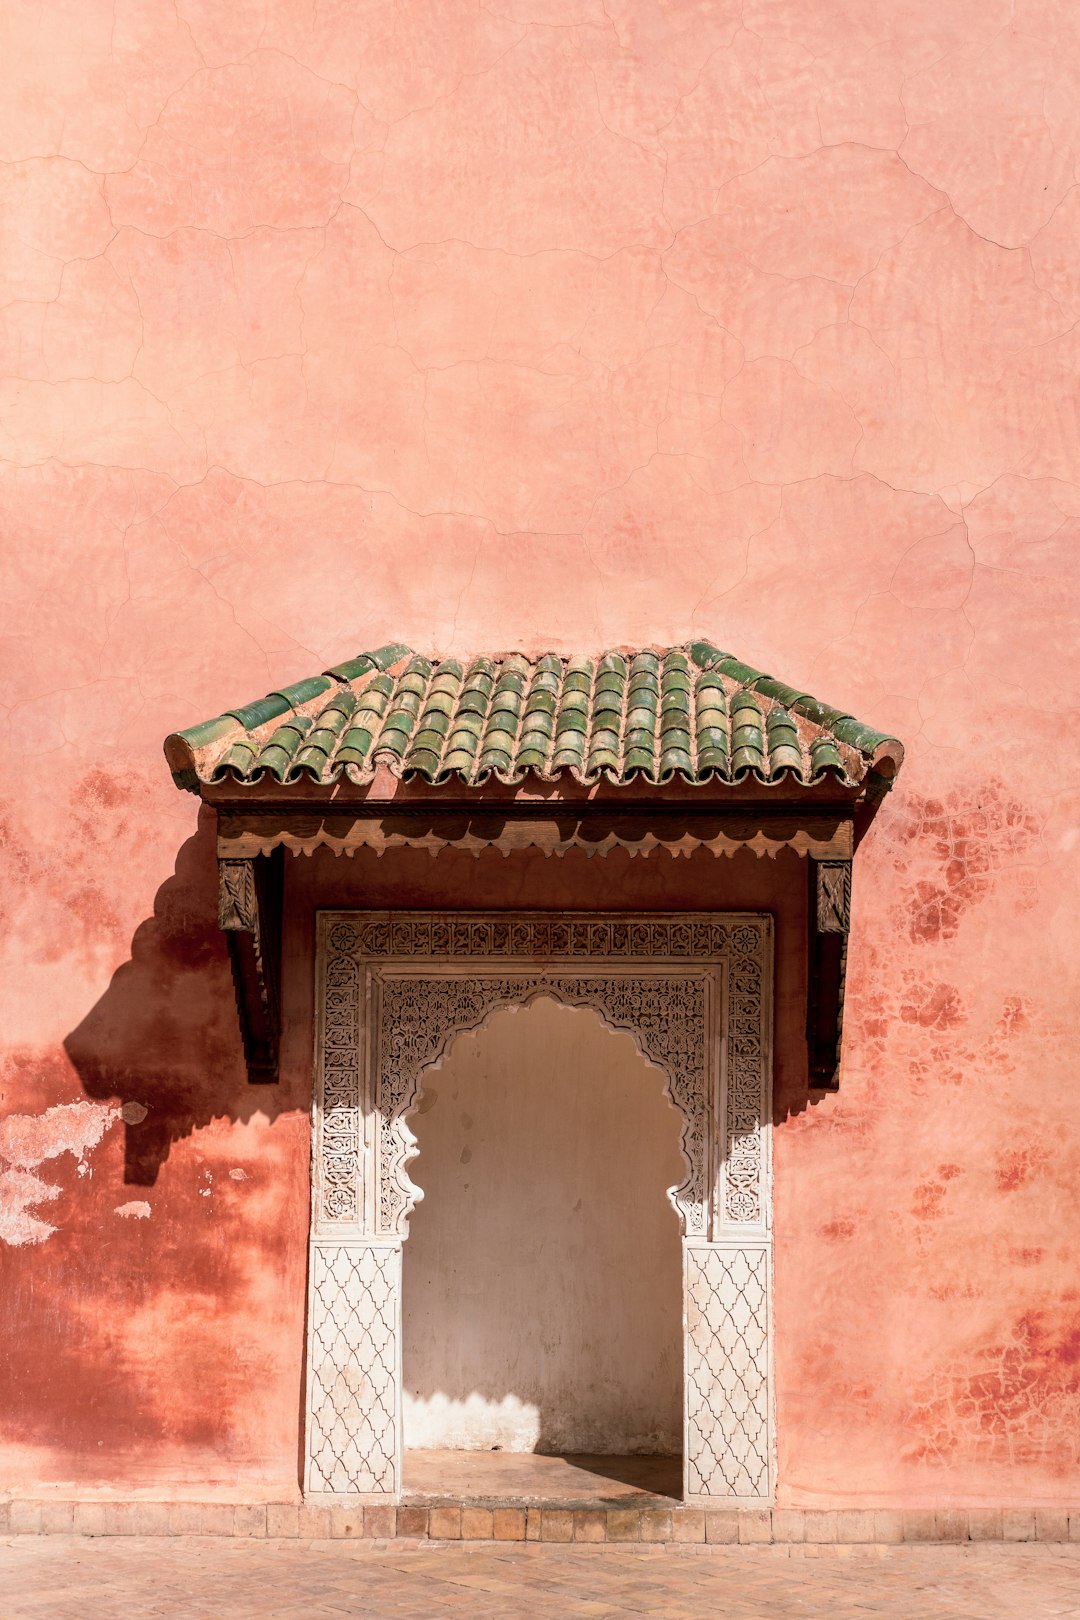 Travel Tips and Stories of Marrakech in Morocco